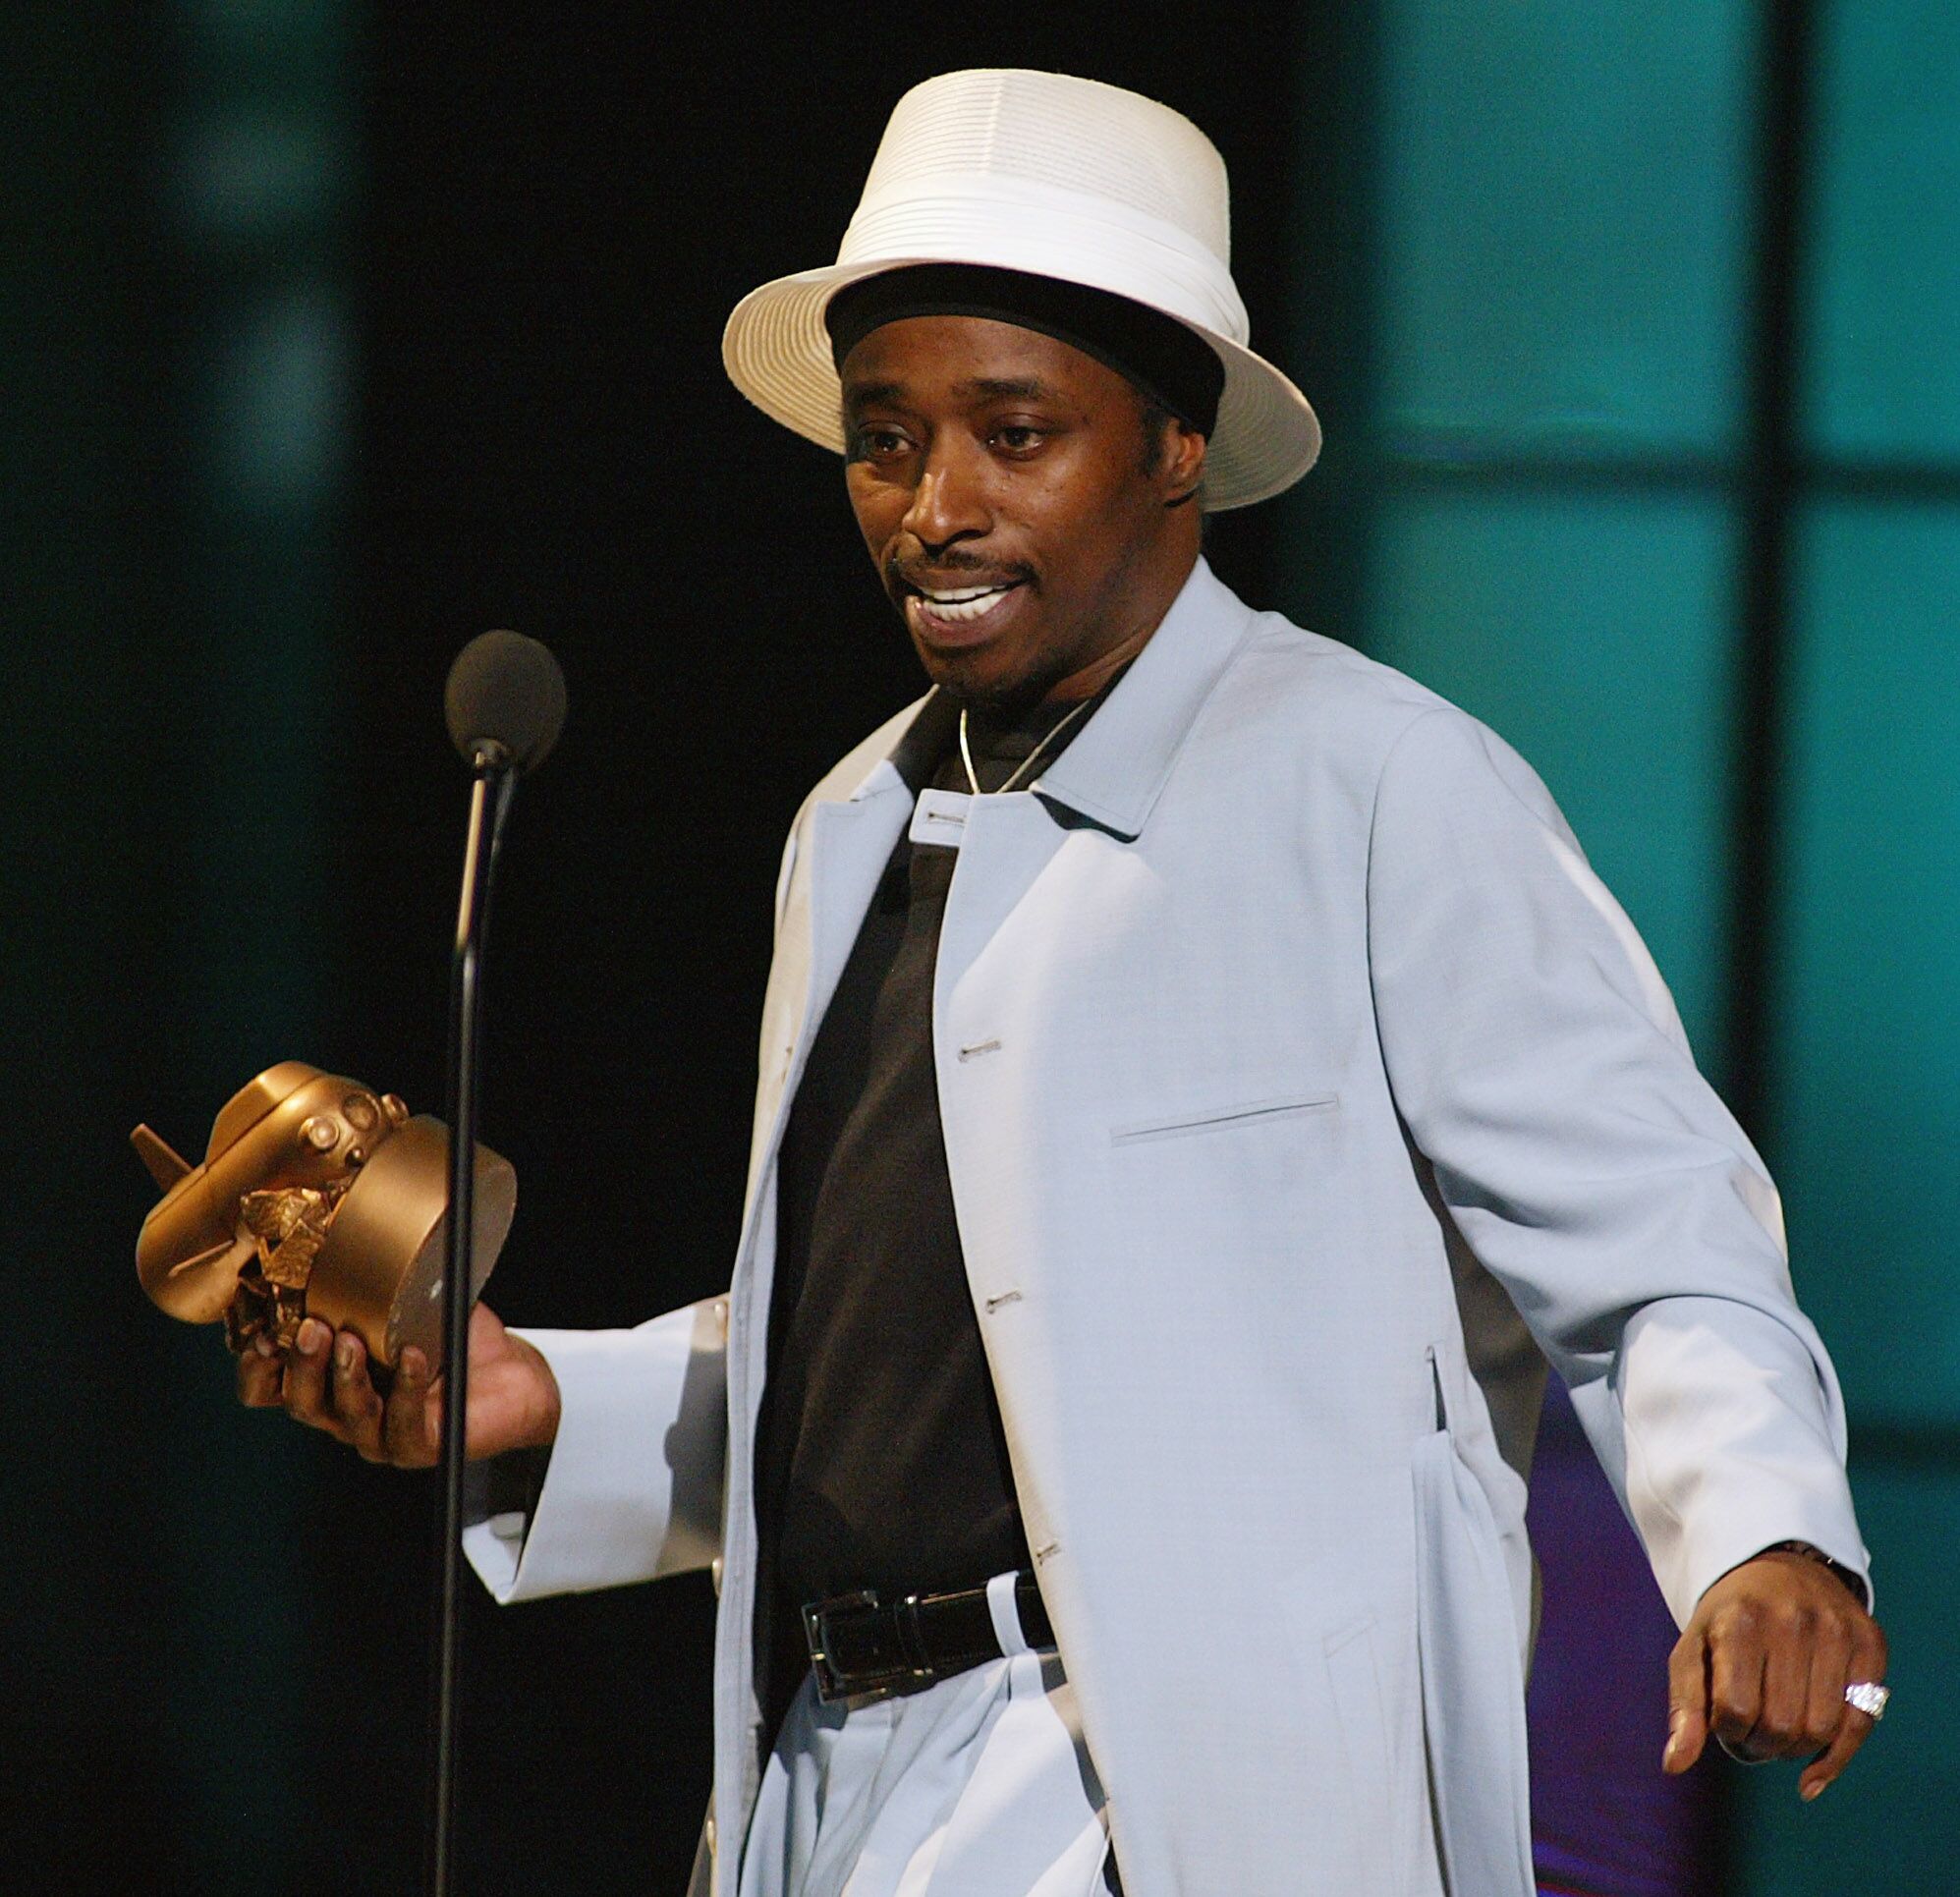 Eddie Griffin at the VH1 Big In 2002 Awards on December 4, 2002, in Los Angeles | Source: Getty Images